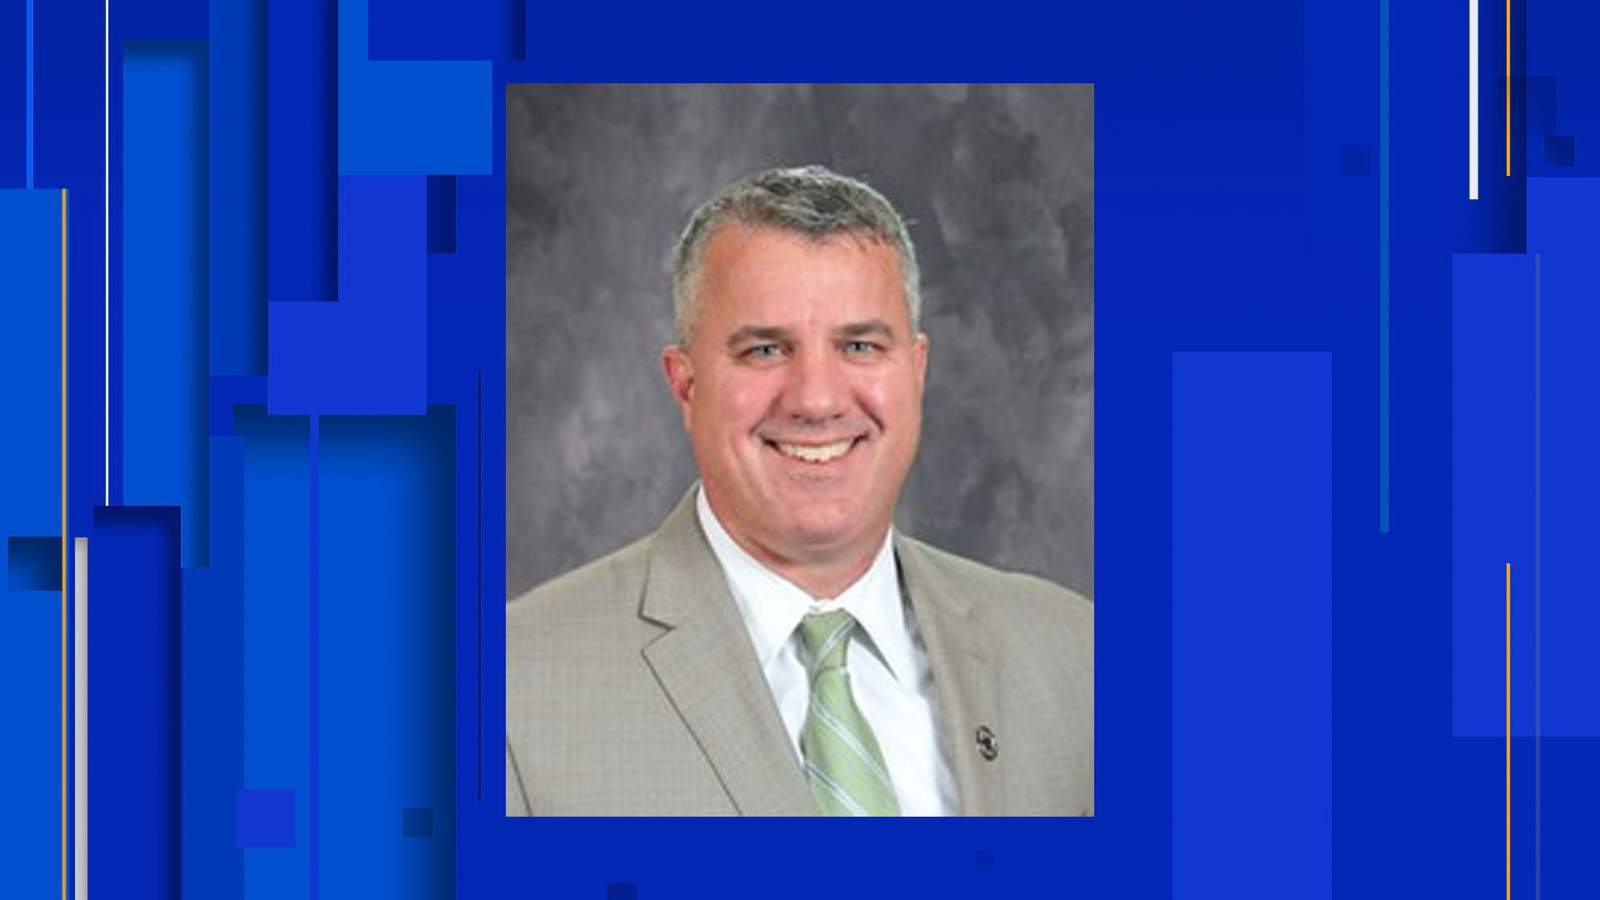 Disgraced SCUCISD board member ordered by judge to pay off $2,100 in unpaid child support